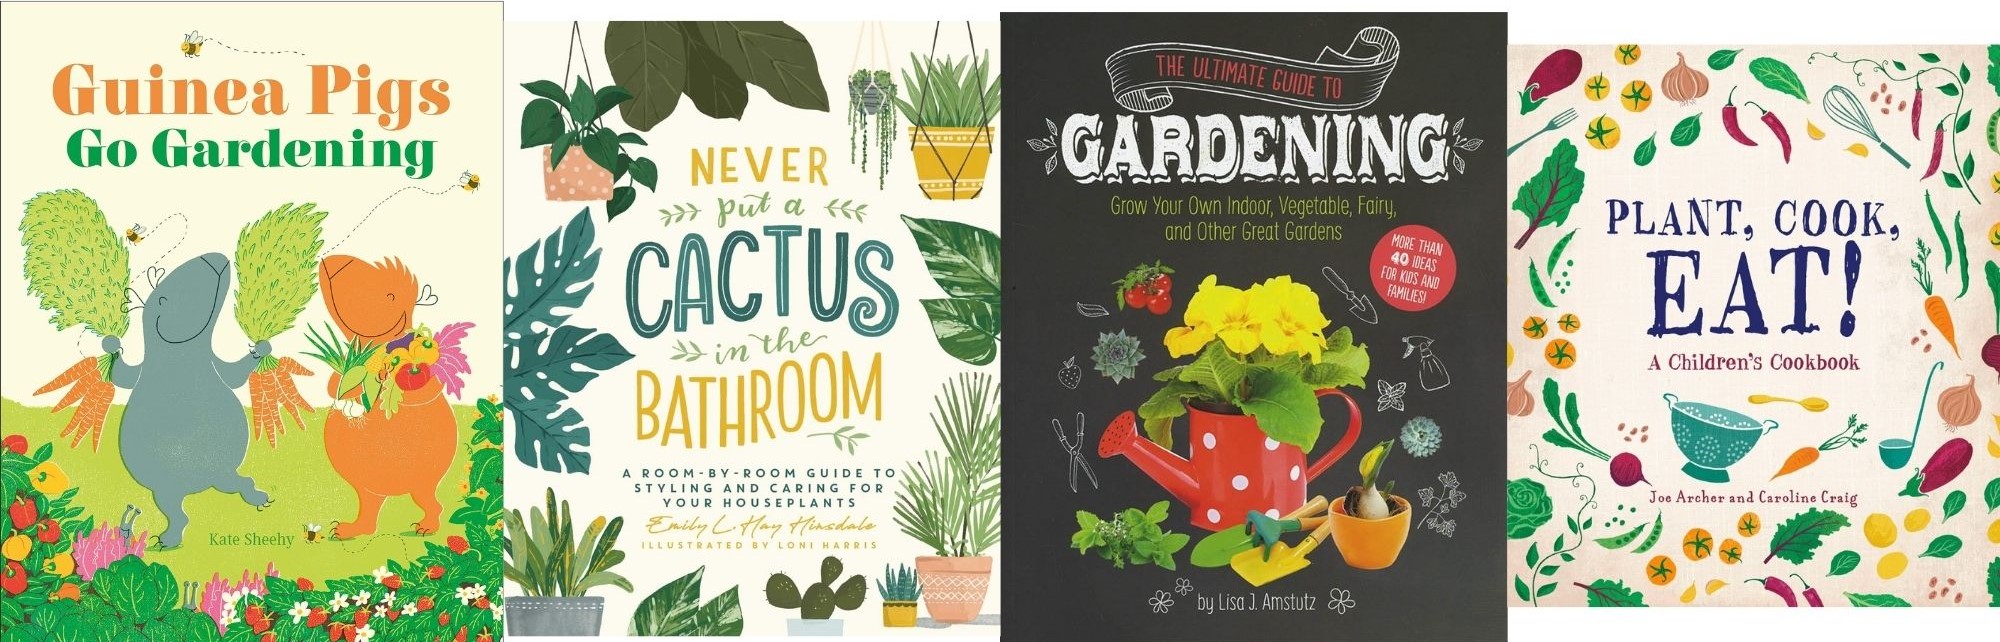 13 Books About Gardening for the Whole Family | Summer Reading 2021